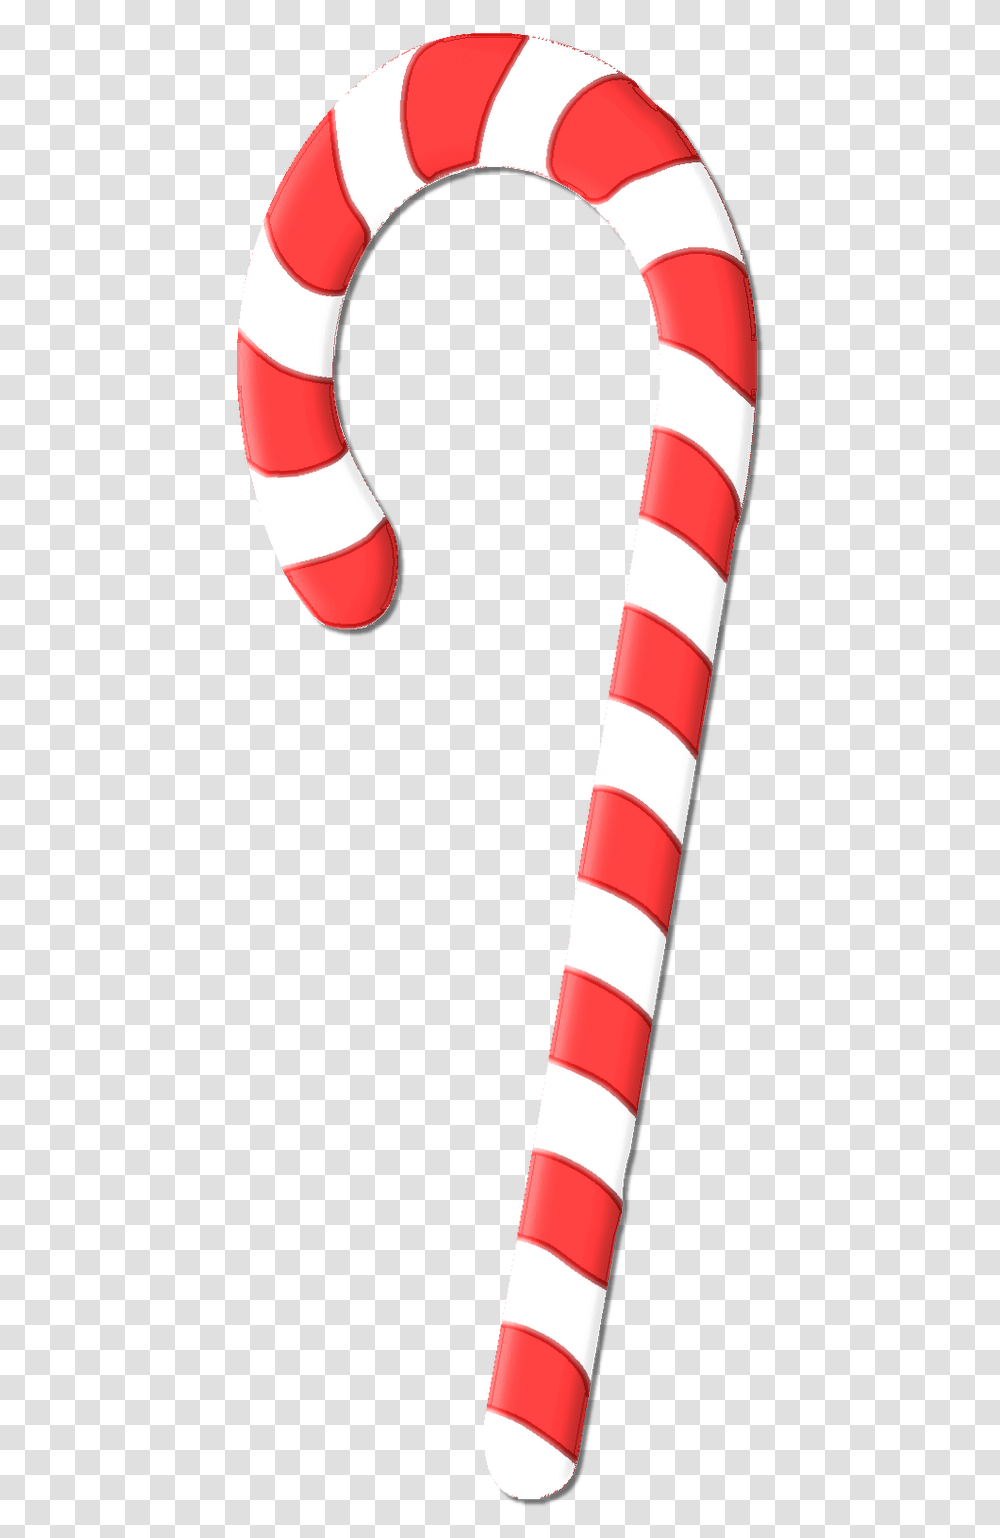 Candy Cane Product Font Line Line Download 7951600 Candy Canes On A Line, Sport, Sports, Blow Dryer, Appliance Transparent Png